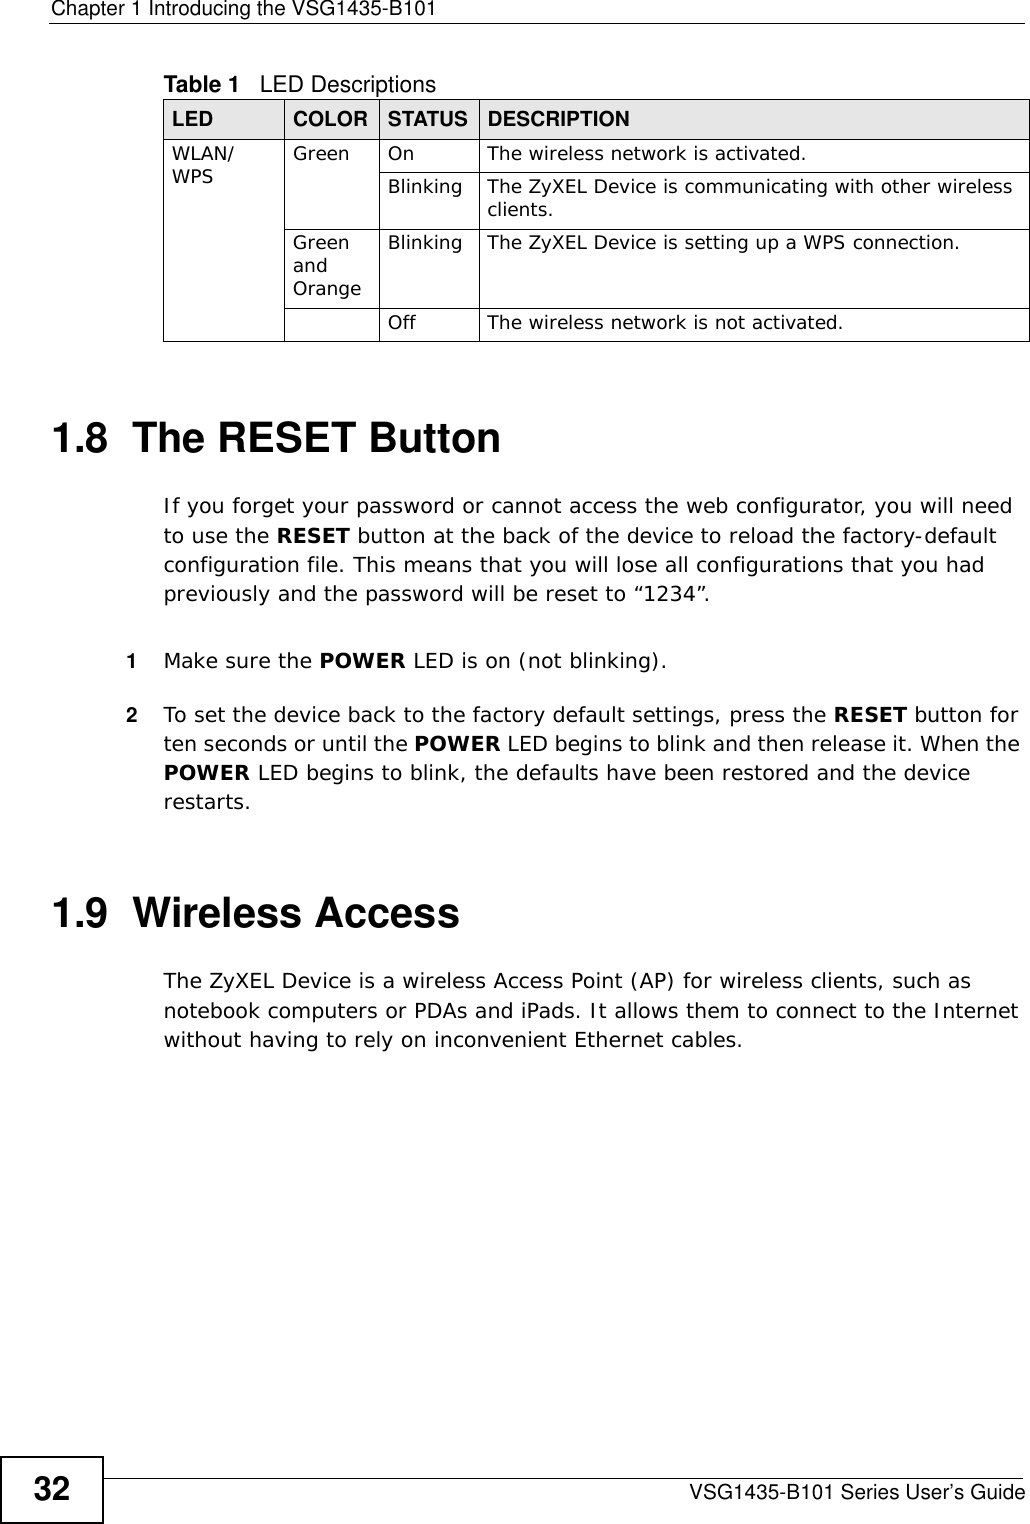 Chapter 1 Introducing the VSG1435-B101VSG1435-B101 Series User’s Guide321.8  The RESET ButtonIf you forget your password or cannot access the web configurator, you will need to use the RESET button at the back of the device to reload the factory-default configuration file. This means that you will lose all configurations that you had previously and the password will be reset to “1234”. 1Make sure the POWER LED is on (not blinking).2To set the device back to the factory default settings, press the RESET button for ten seconds or until the POWER LED begins to blink and then release it. When the POWER LED begins to blink, the defaults have been restored and the device restarts.1.9  Wireless AccessThe ZyXEL Device is a wireless Access Point (AP) for wireless clients, such as notebook computers or PDAs and iPads. It allows them to connect to the Internet without having to rely on inconvenient Ethernet cables.WLAN/WPS Green On The wireless network is activated.Blinking The ZyXEL Device is communicating with other wireless clients.Green and OrangeBlinking The ZyXEL Device is setting up a WPS connection.Off The wireless network is not activated.Table 1   LED DescriptionsLED COLOR STATUS DESCRIPTION